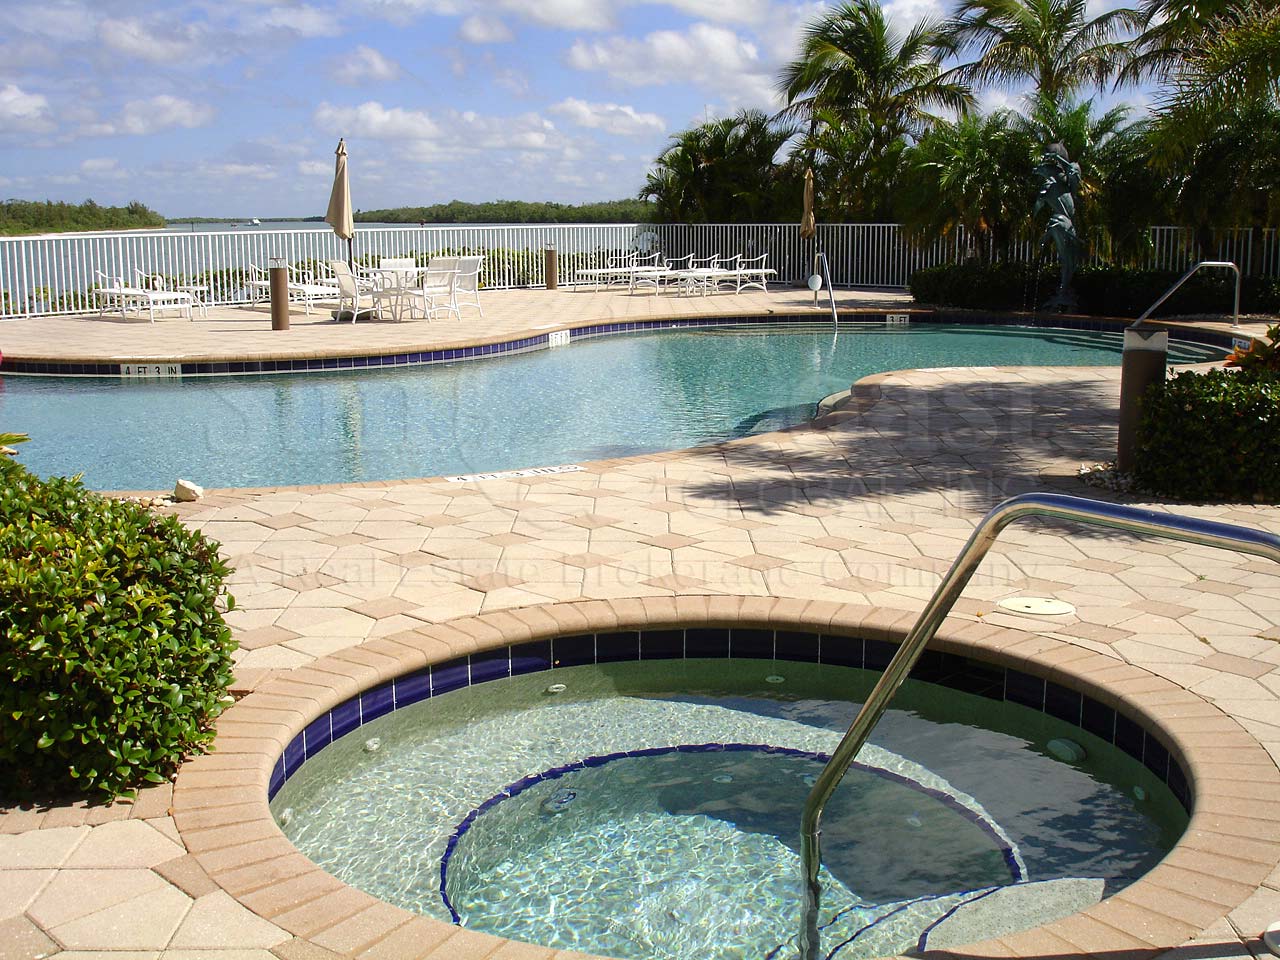 Twin Dolphins Community Pool and Hot Tub